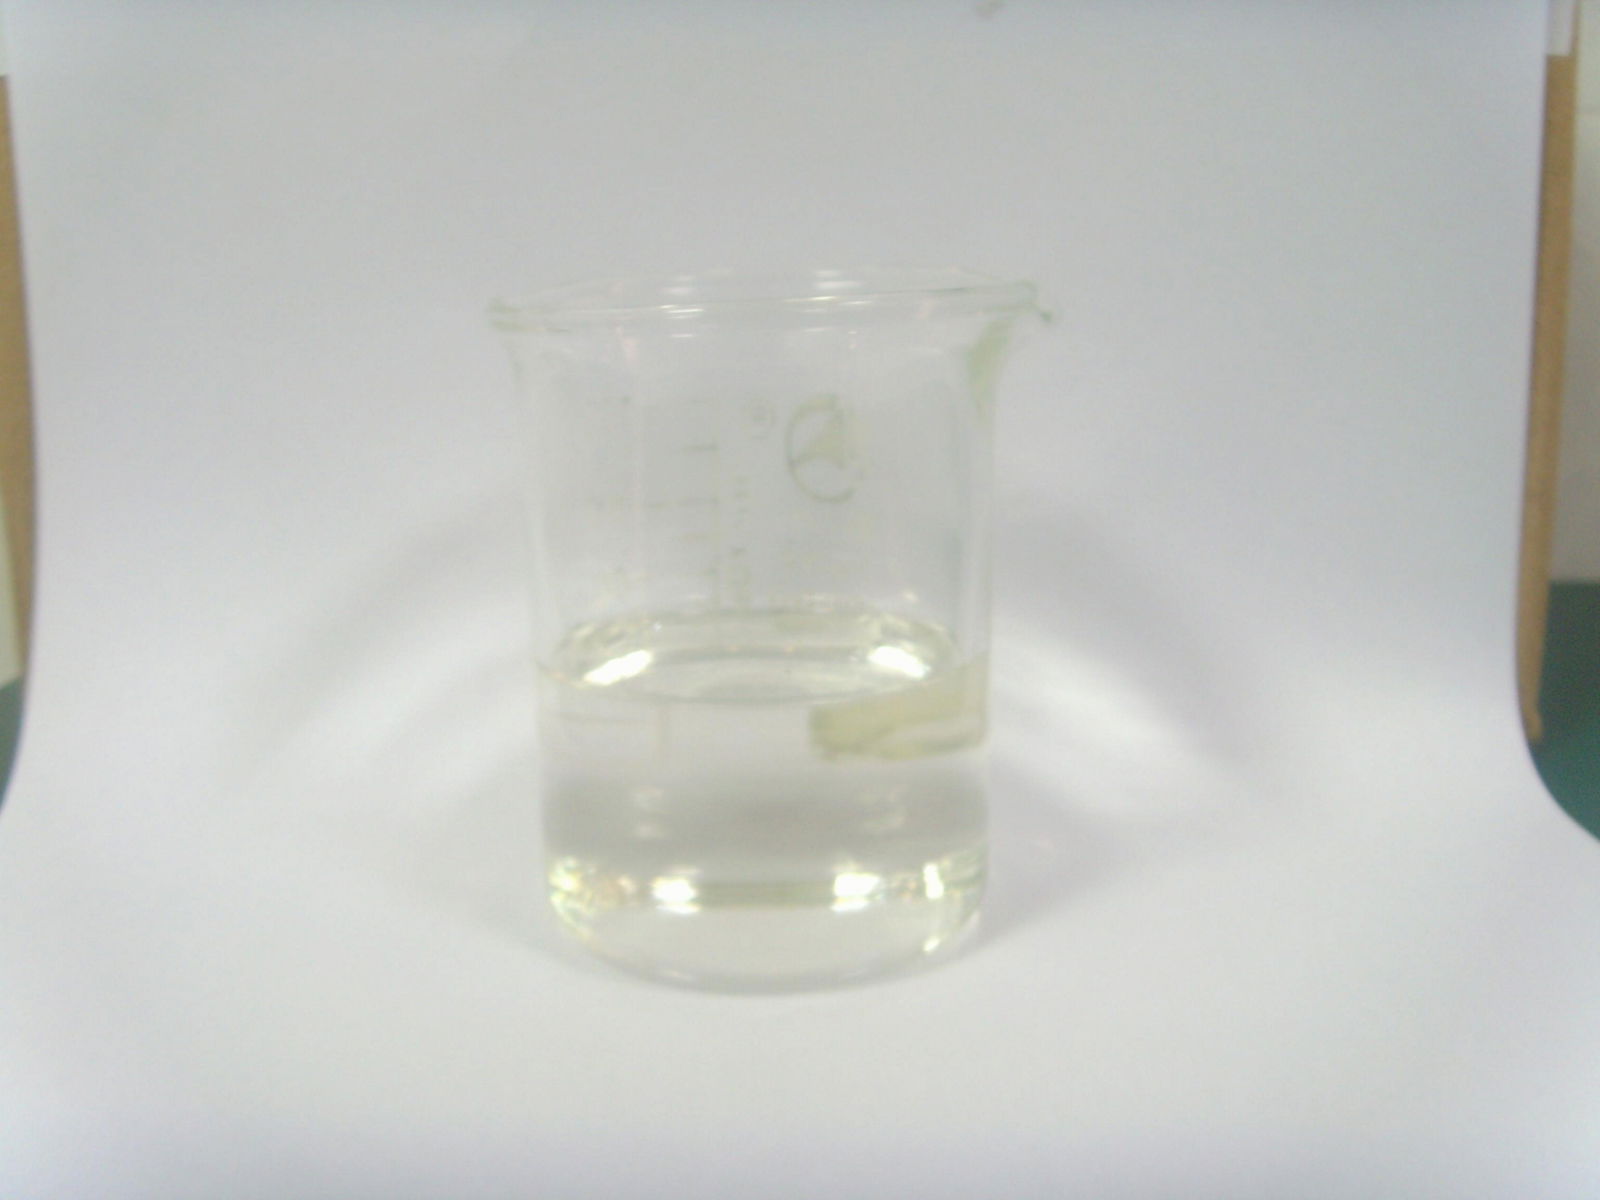 Selling  2-Cyclohexylethanol CAS#4442-79-9  In stock 2